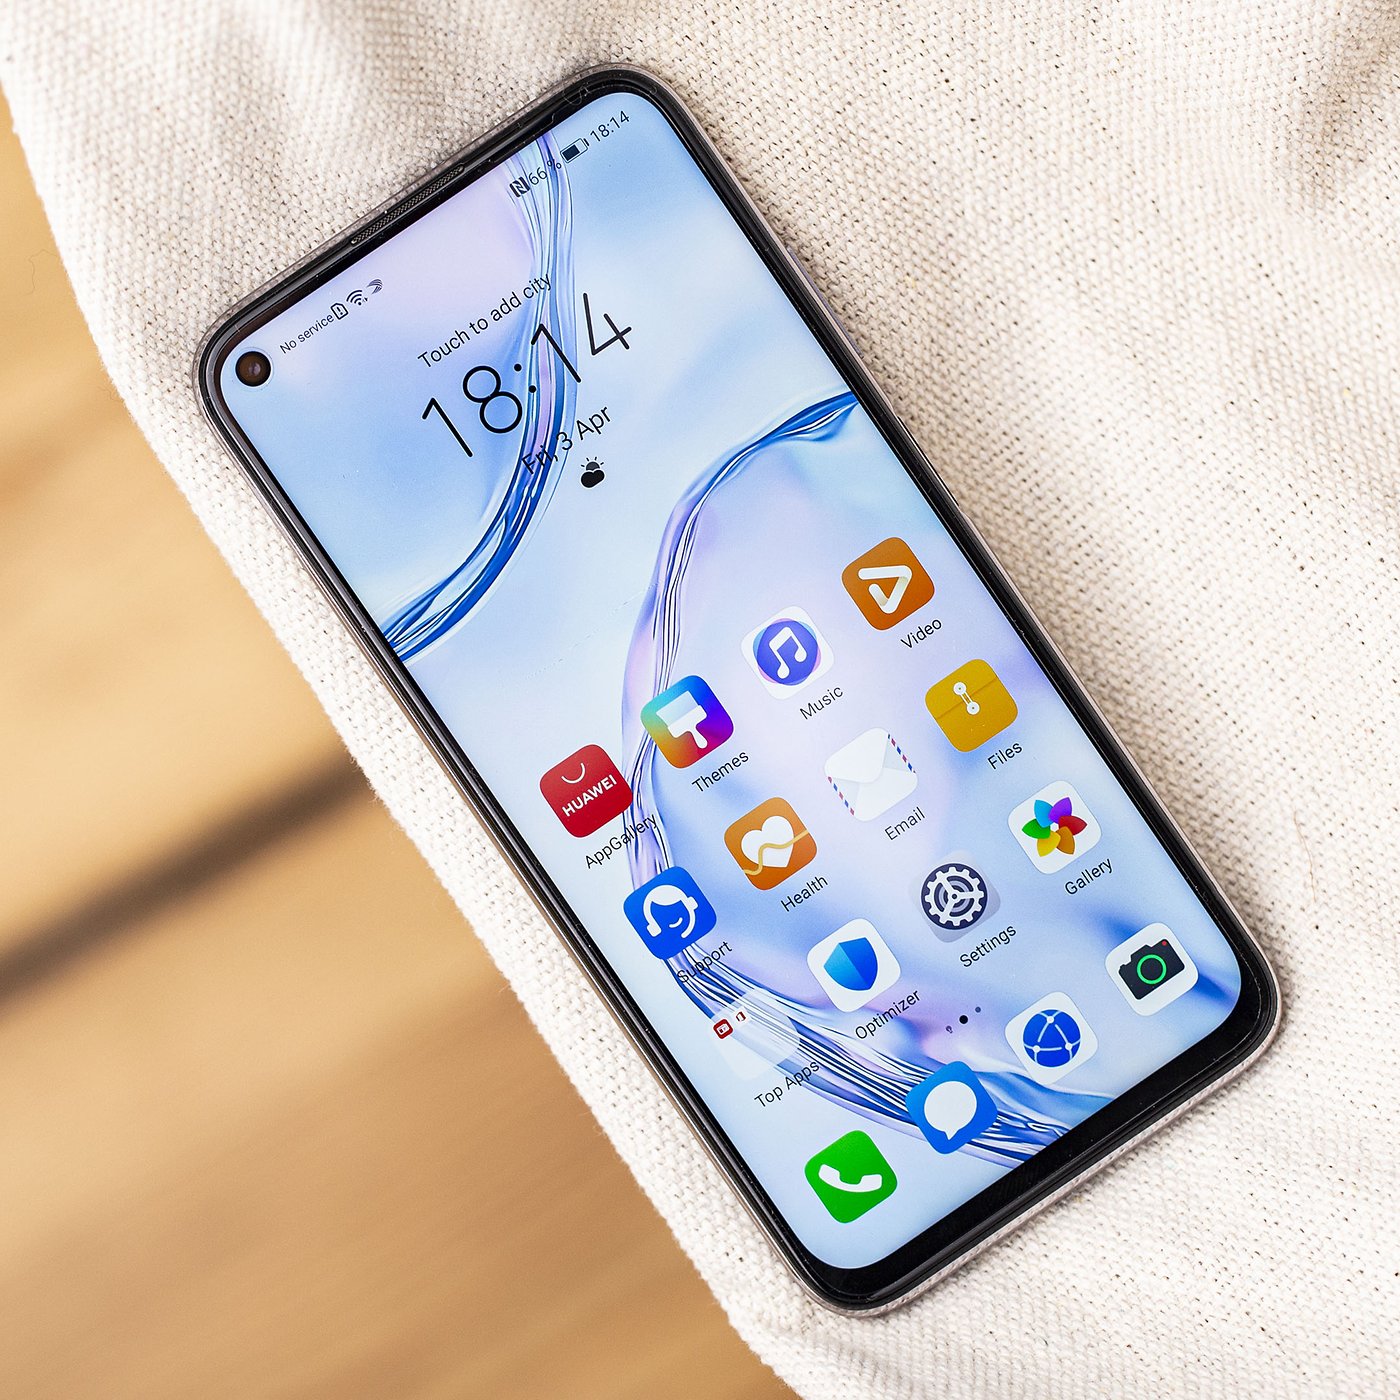 Huawei P40 Lite With Quad Rear Cameras, Kirin 810 SoC Launched: Price,  Specifications